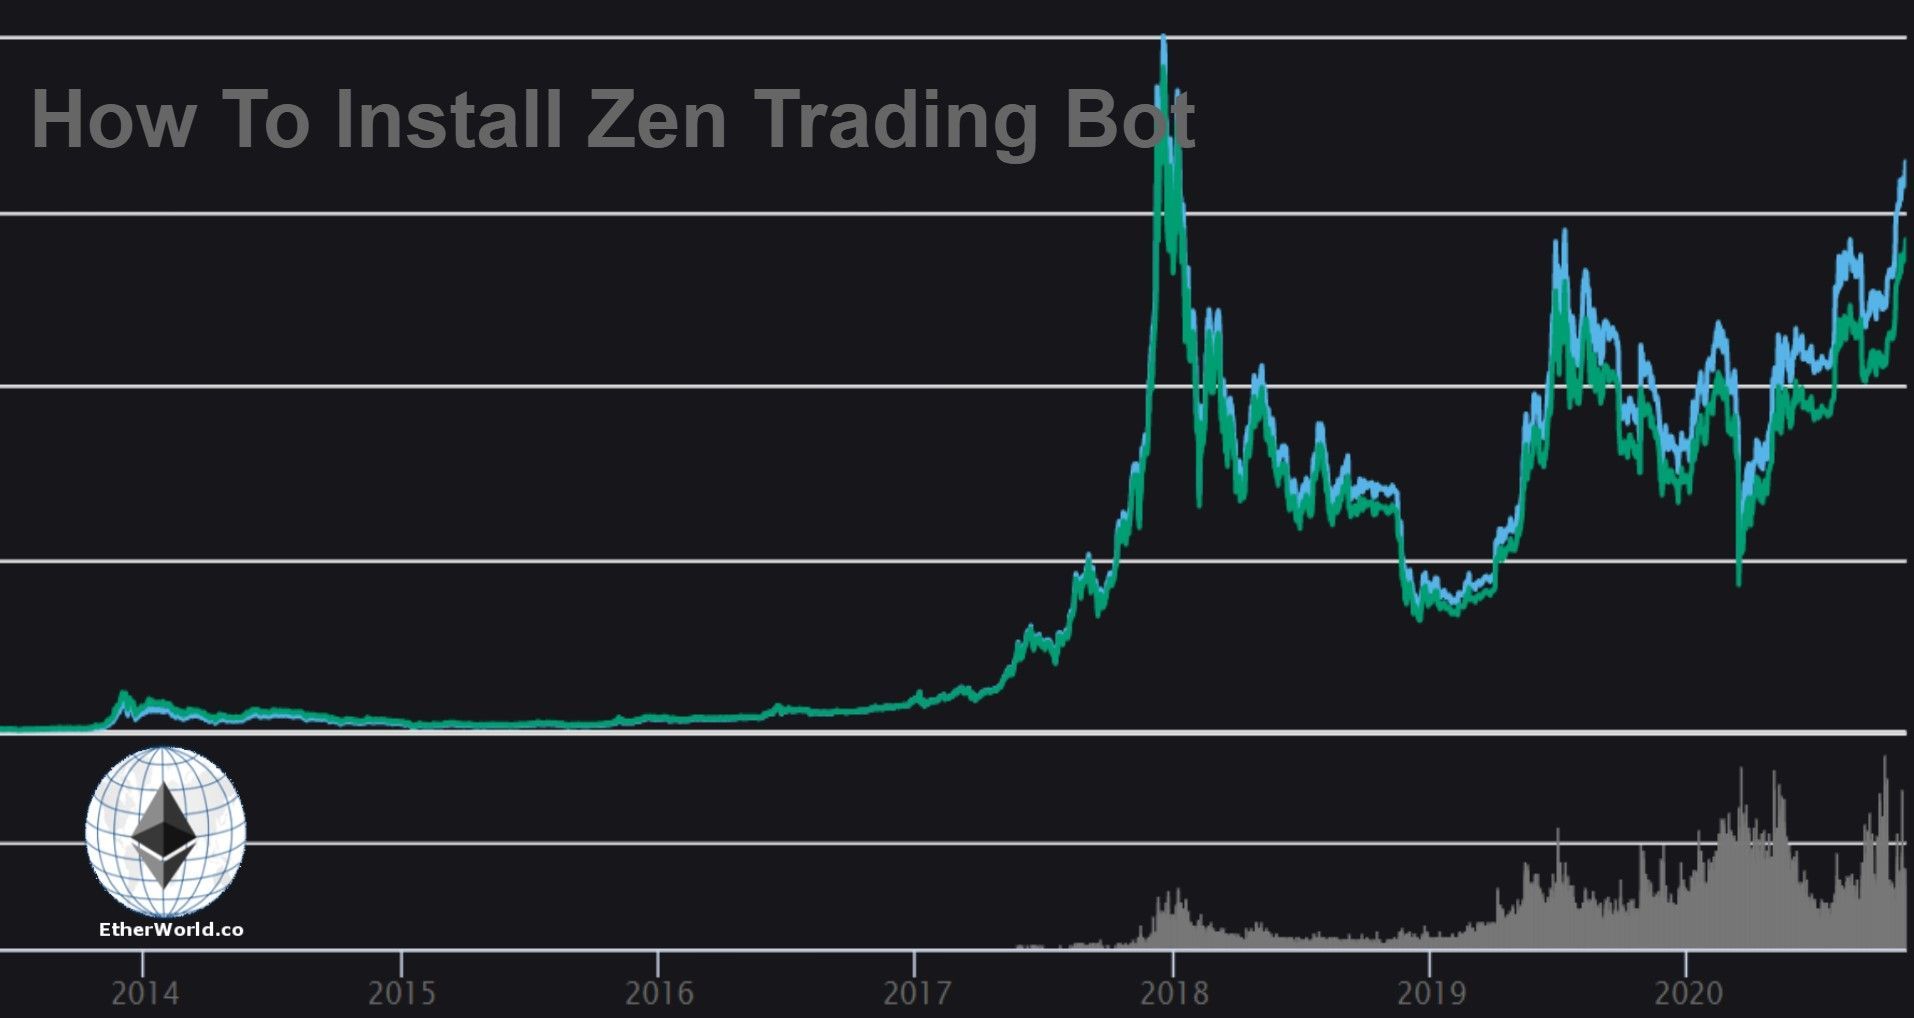 How To Install Zen Trading Bot